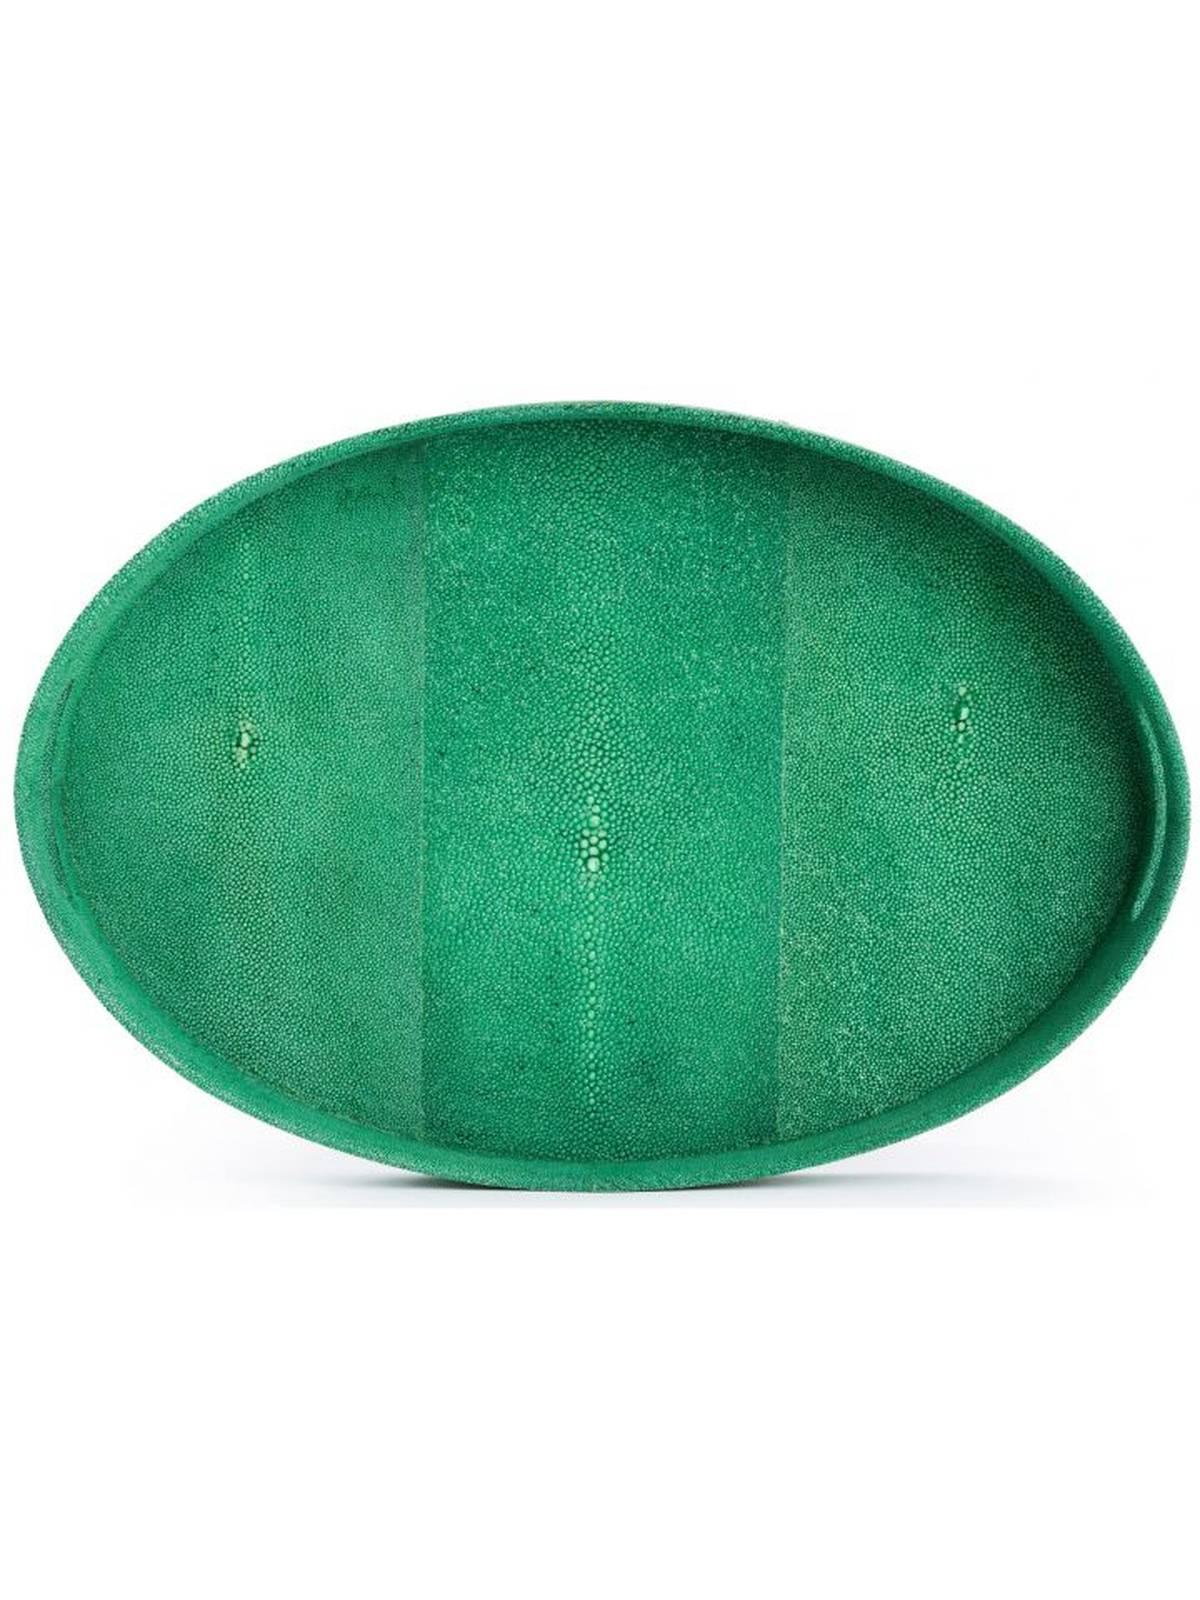 Handmade genuine stingray tray in beautiful emerald green. Subtle variations in shagreen colour are possible, made in France.